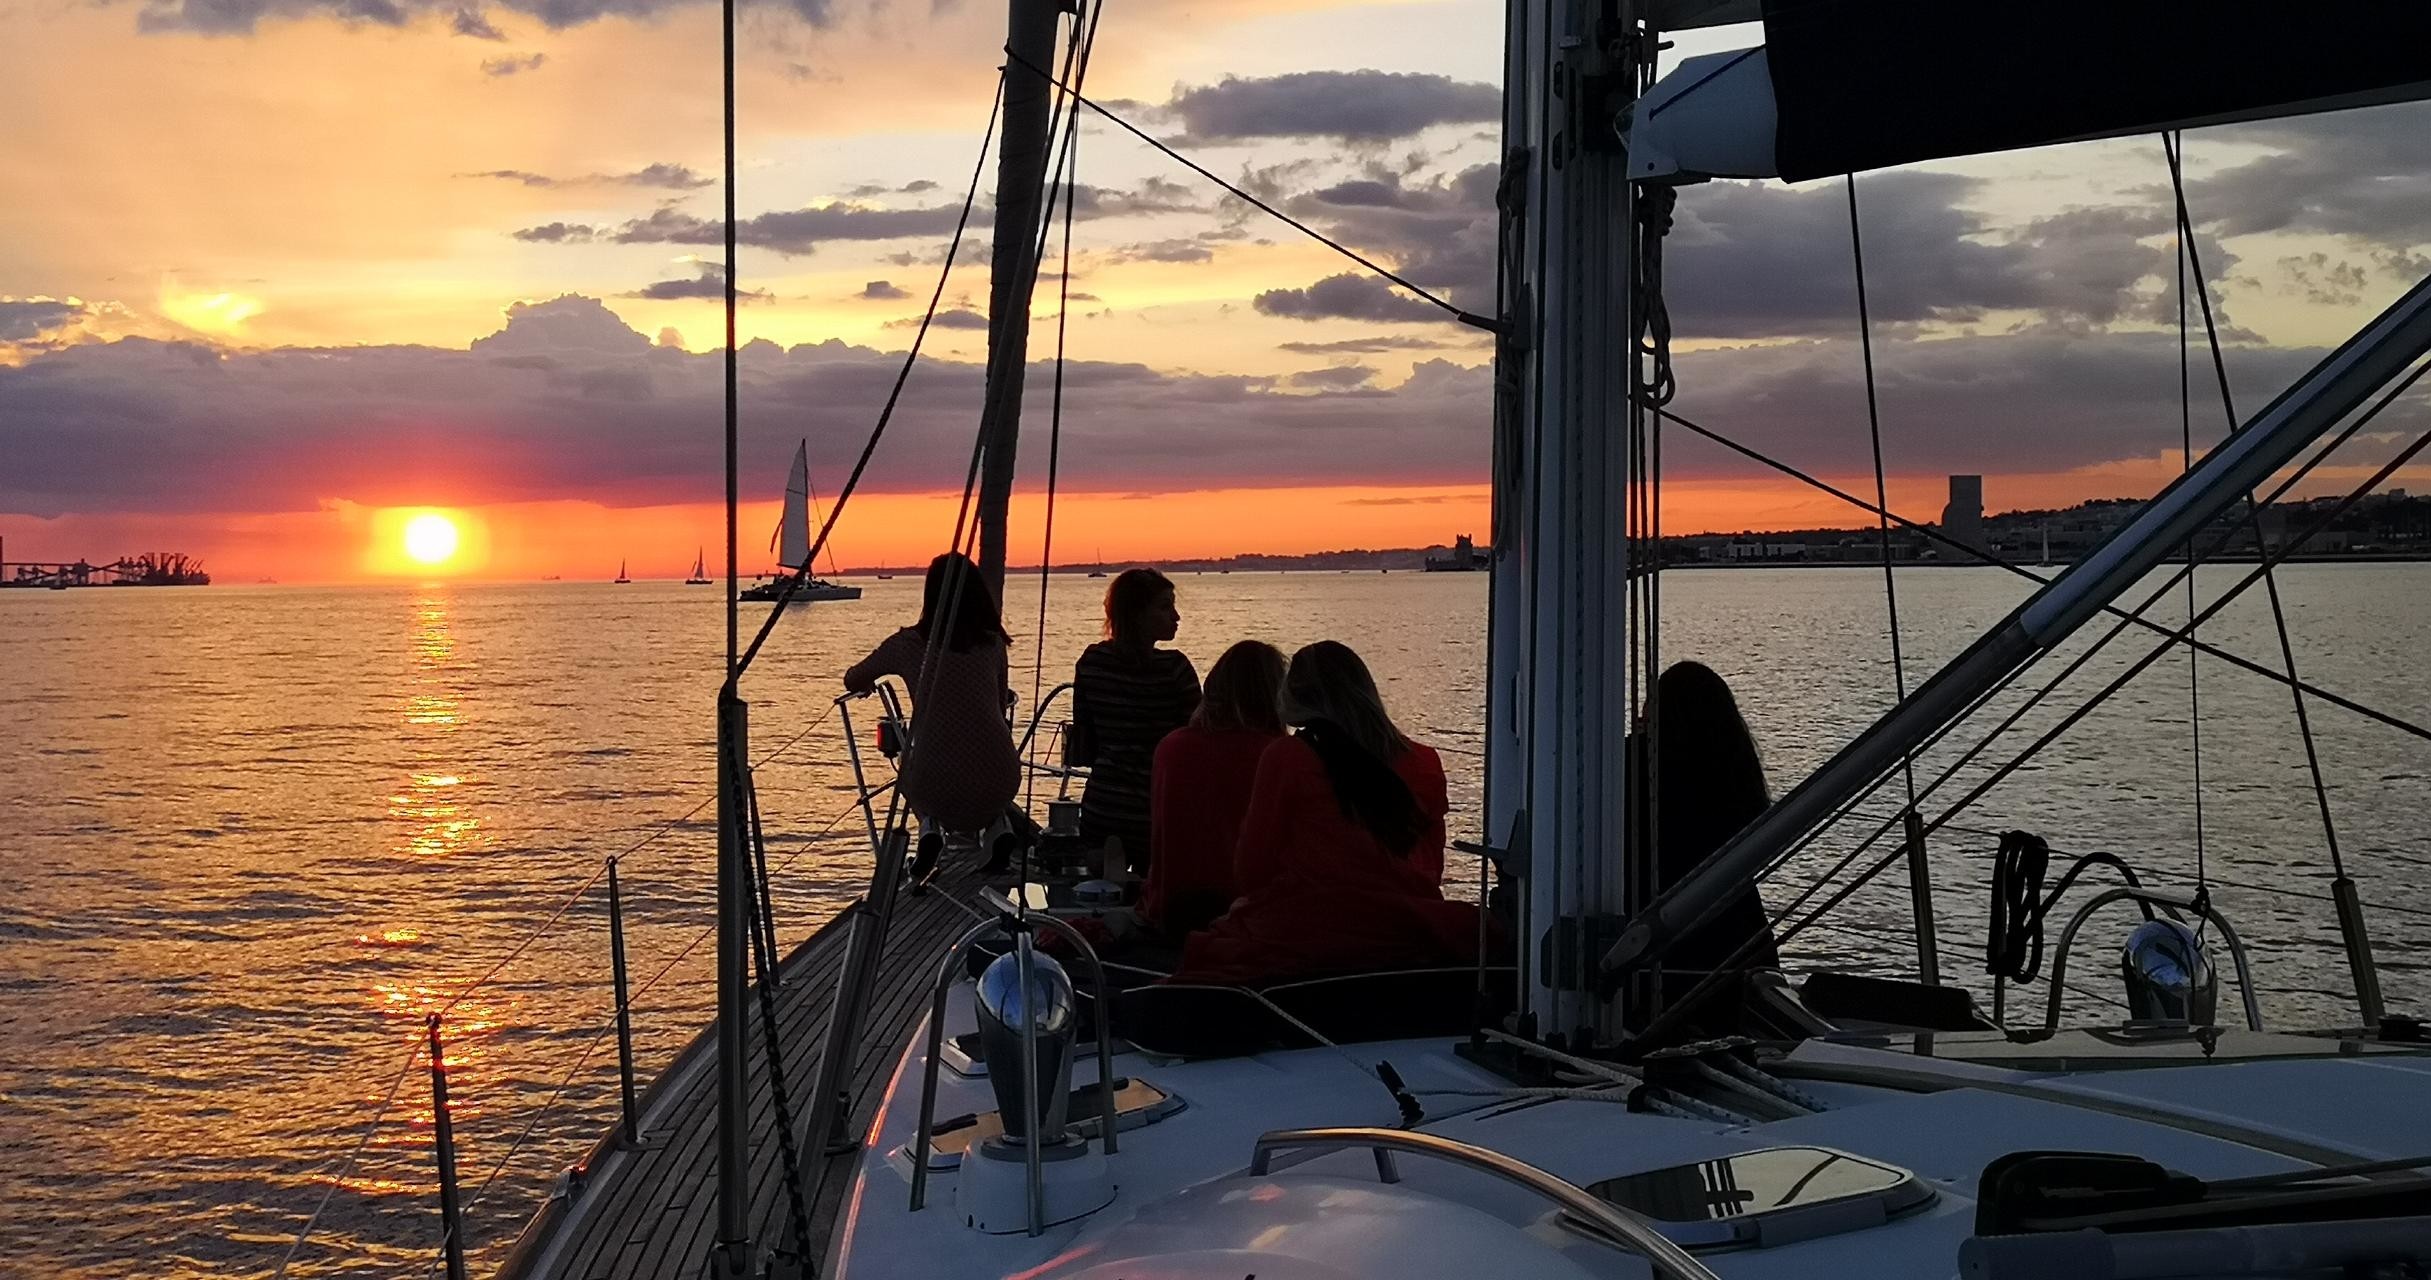 Private Sailing during Sunset in Lisbon